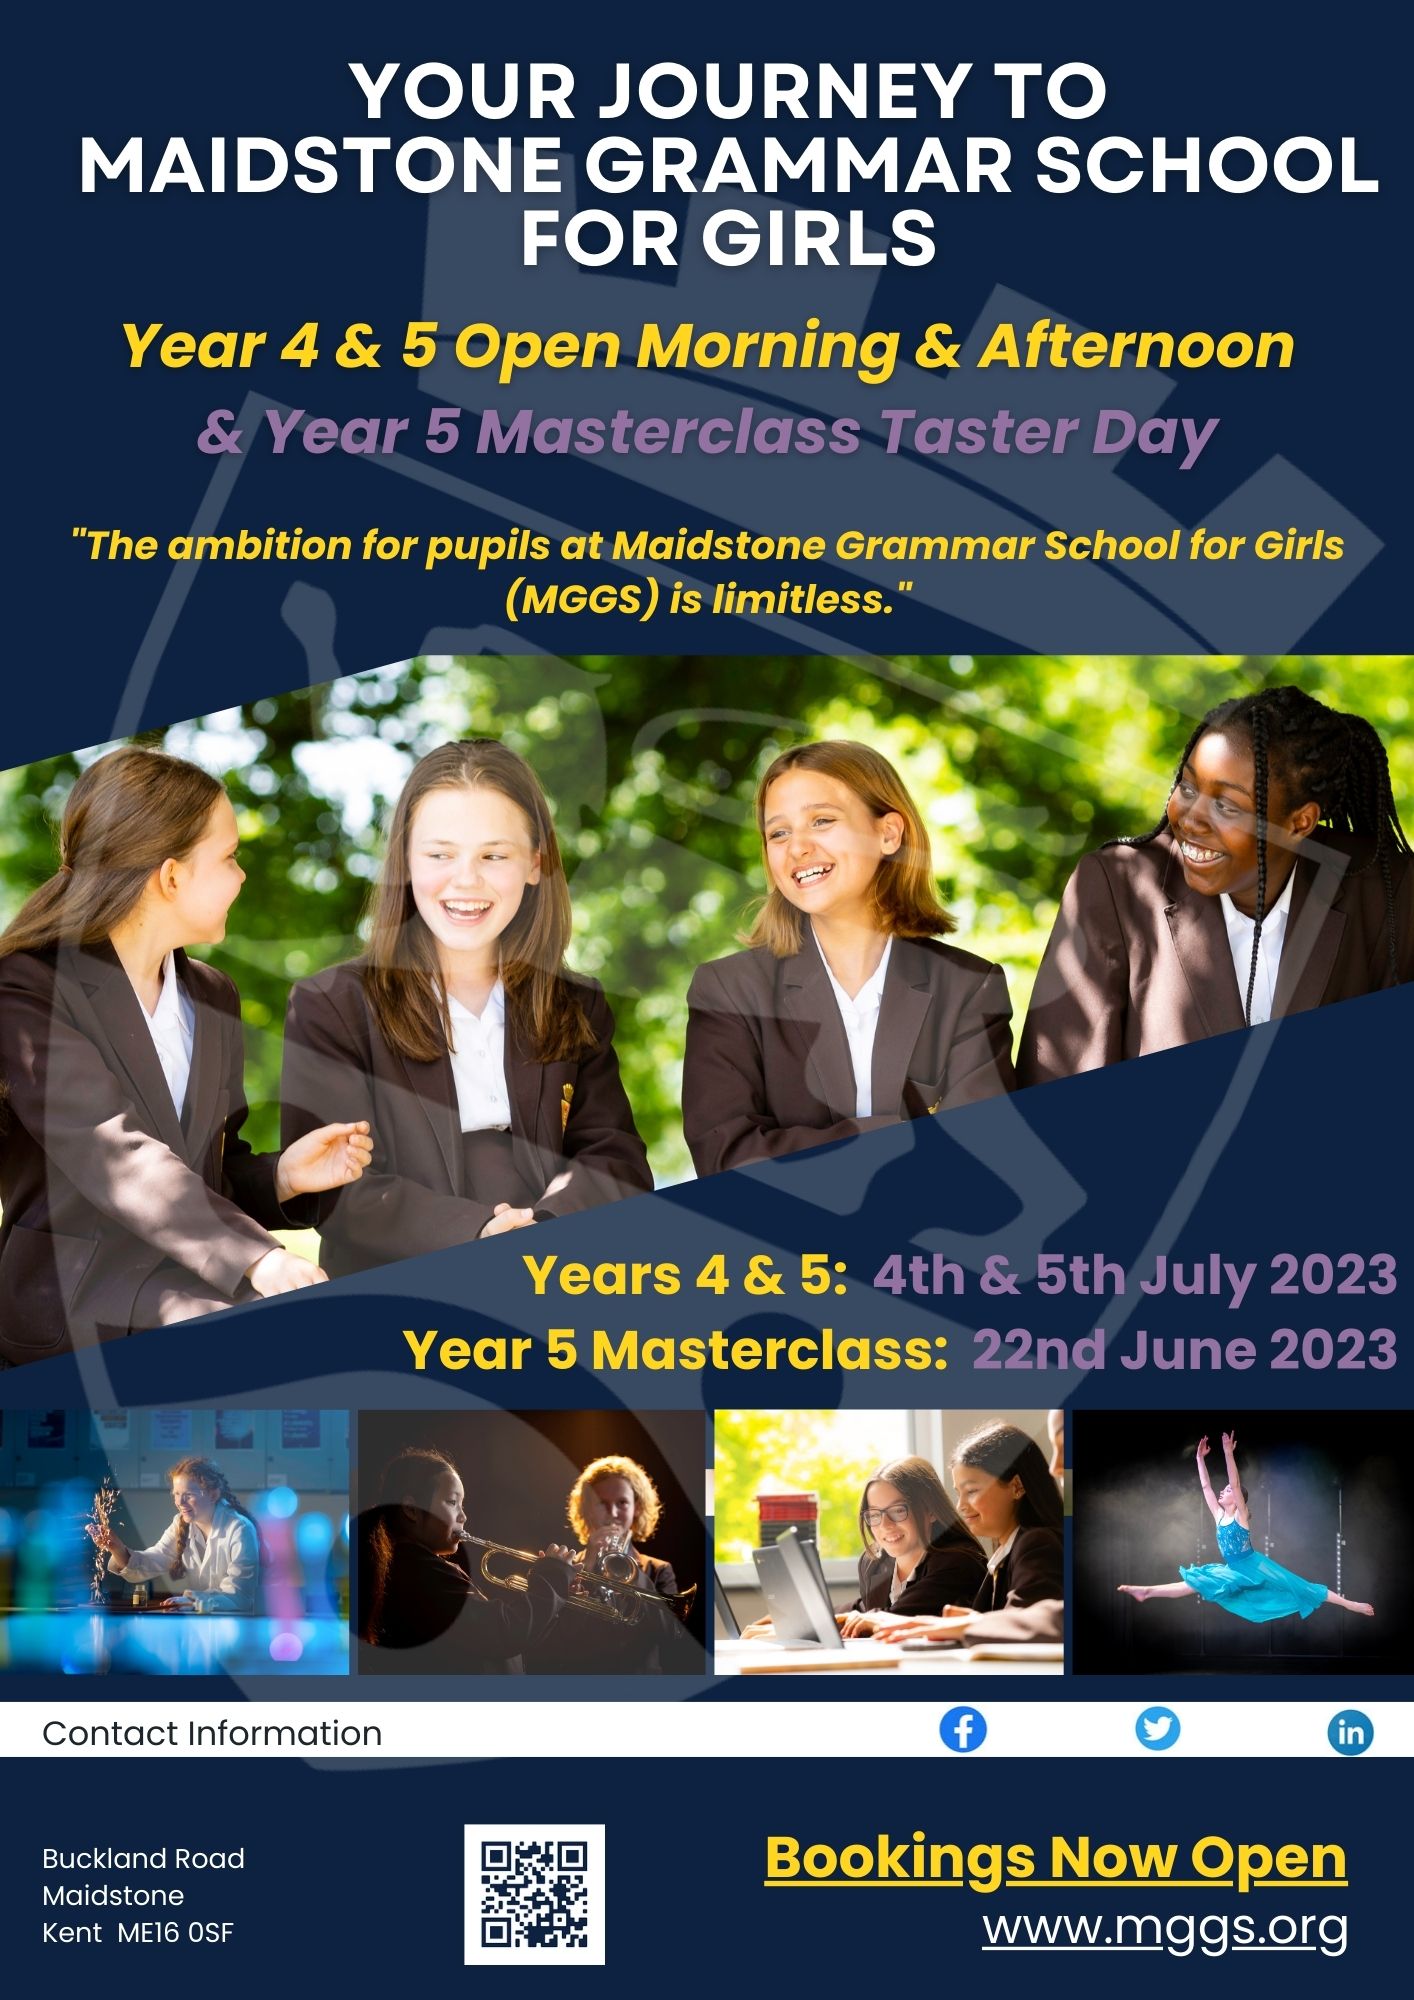 MGGS Year 5 & 6 Open Afternoons & Open Evening October 2022